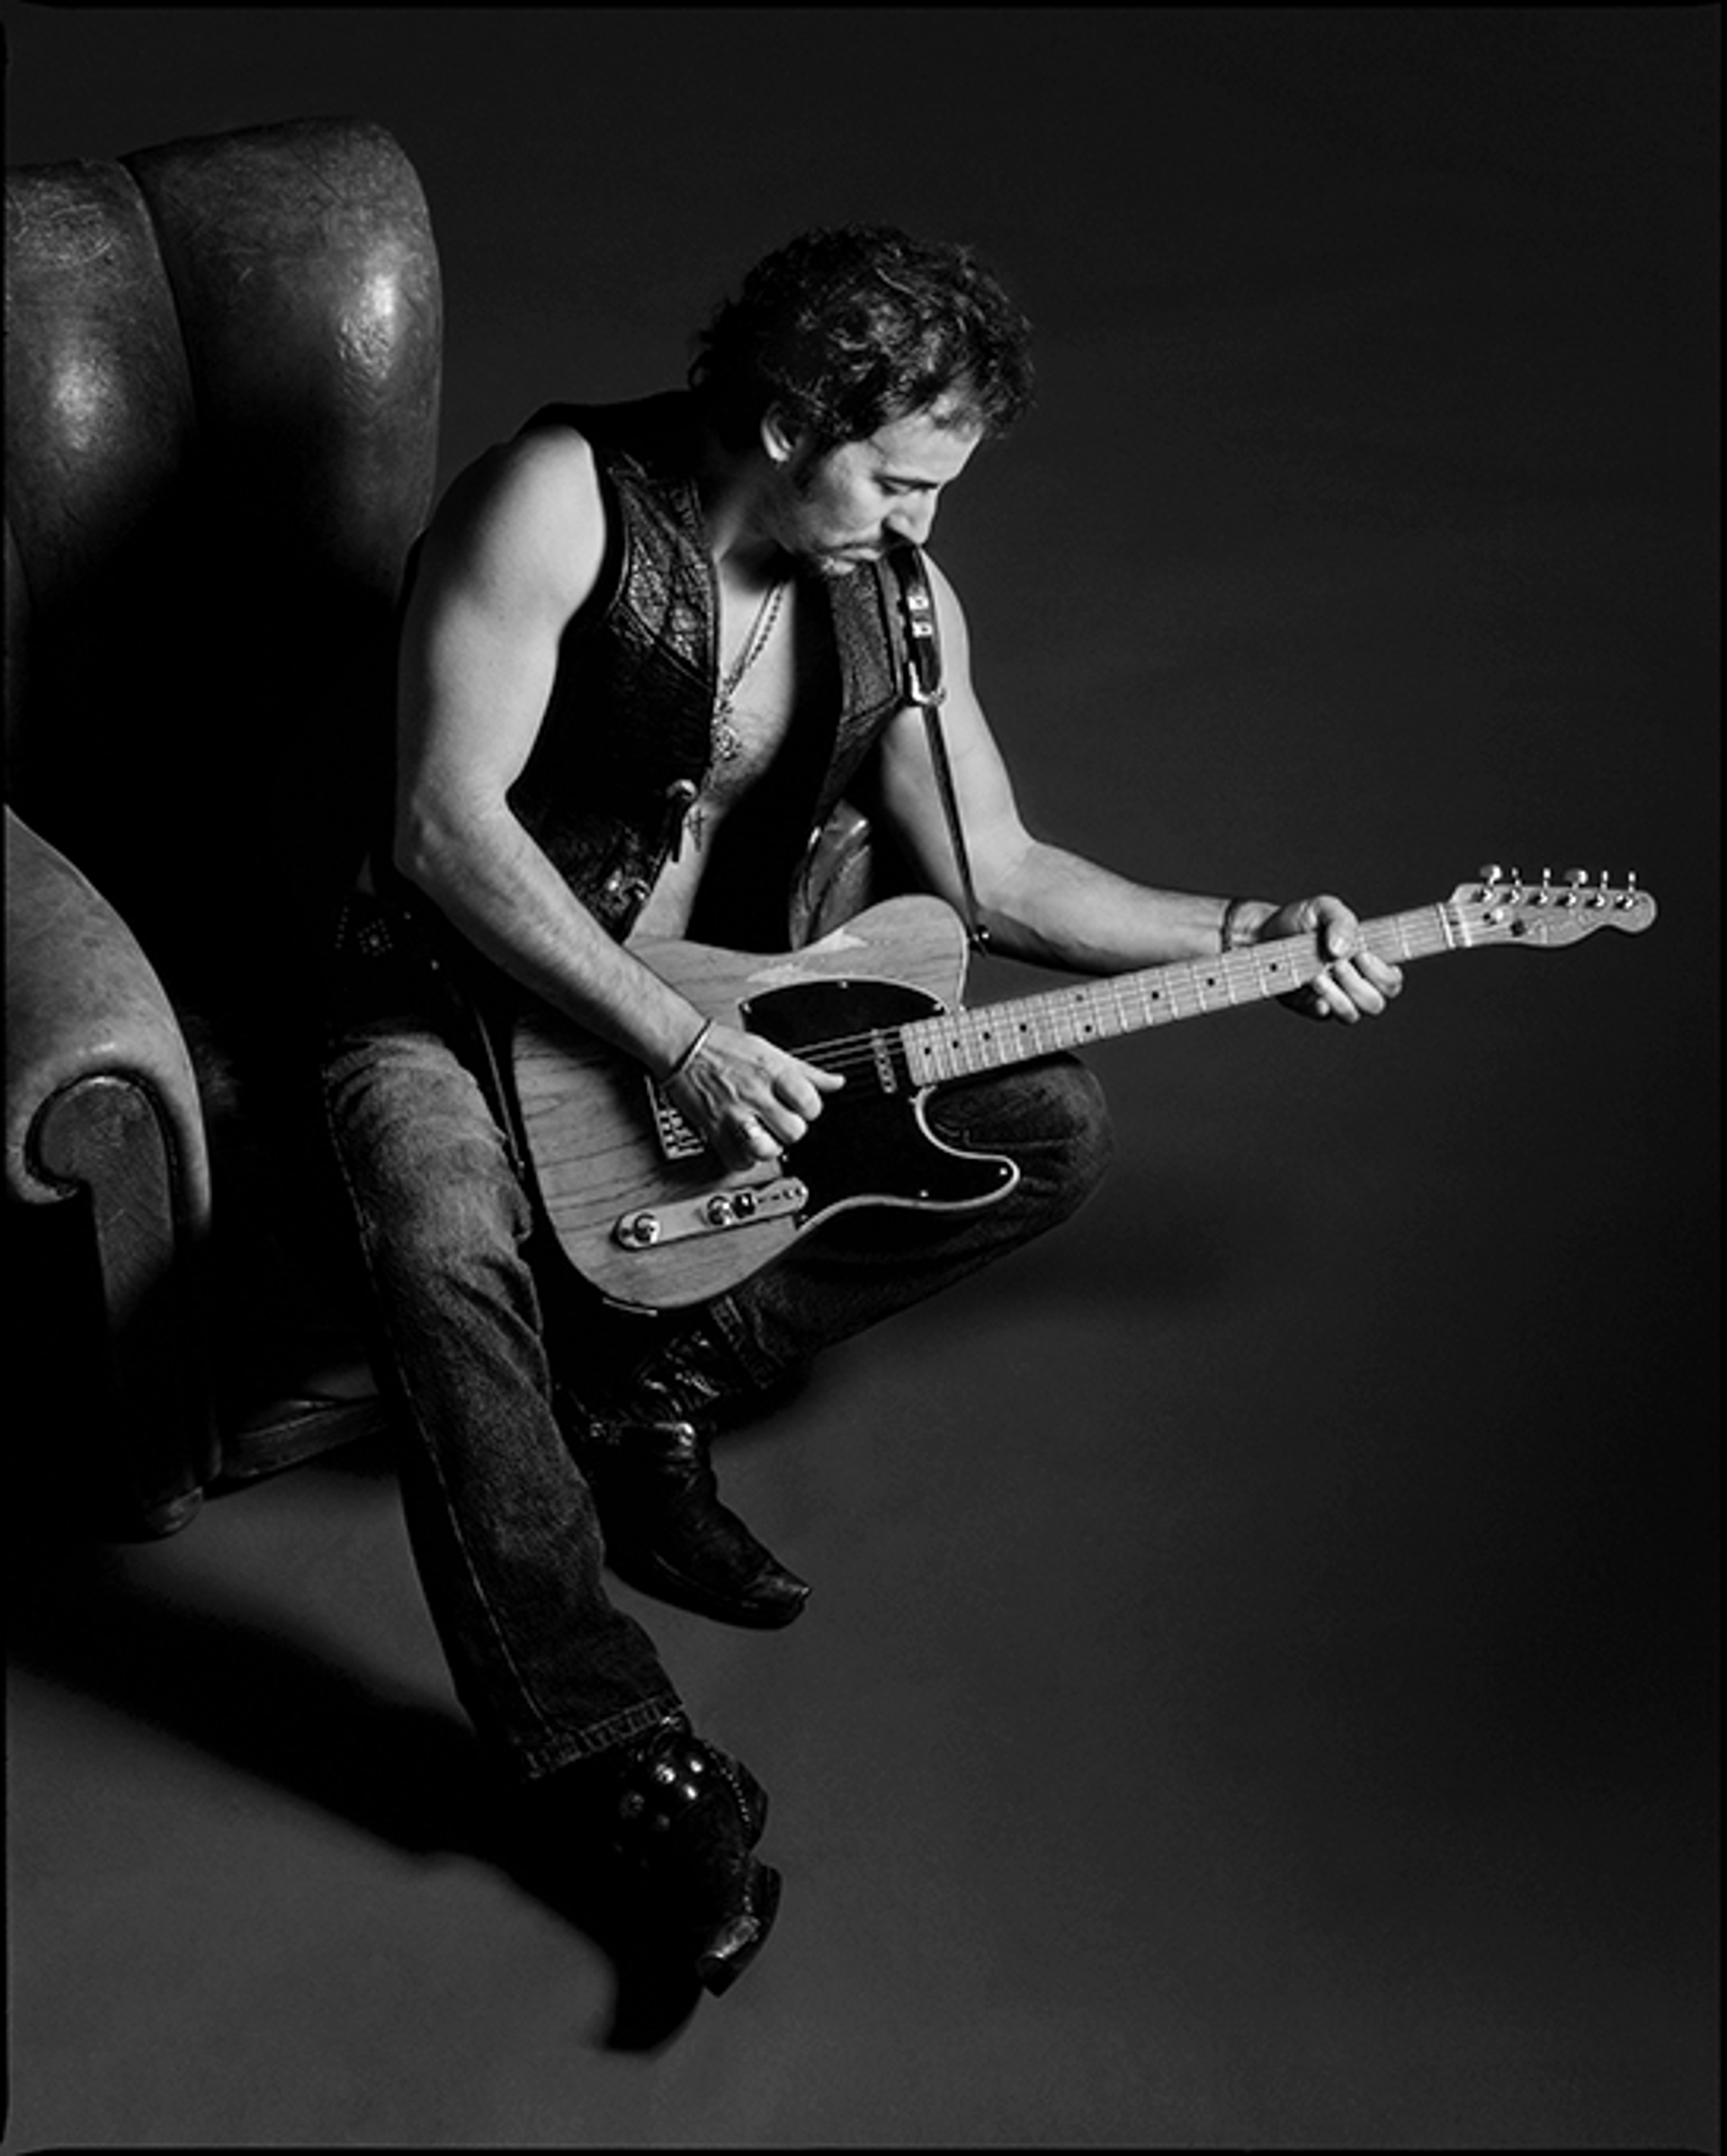 91152 Bruce Springsteen Edge of Chair BW by Timothy White